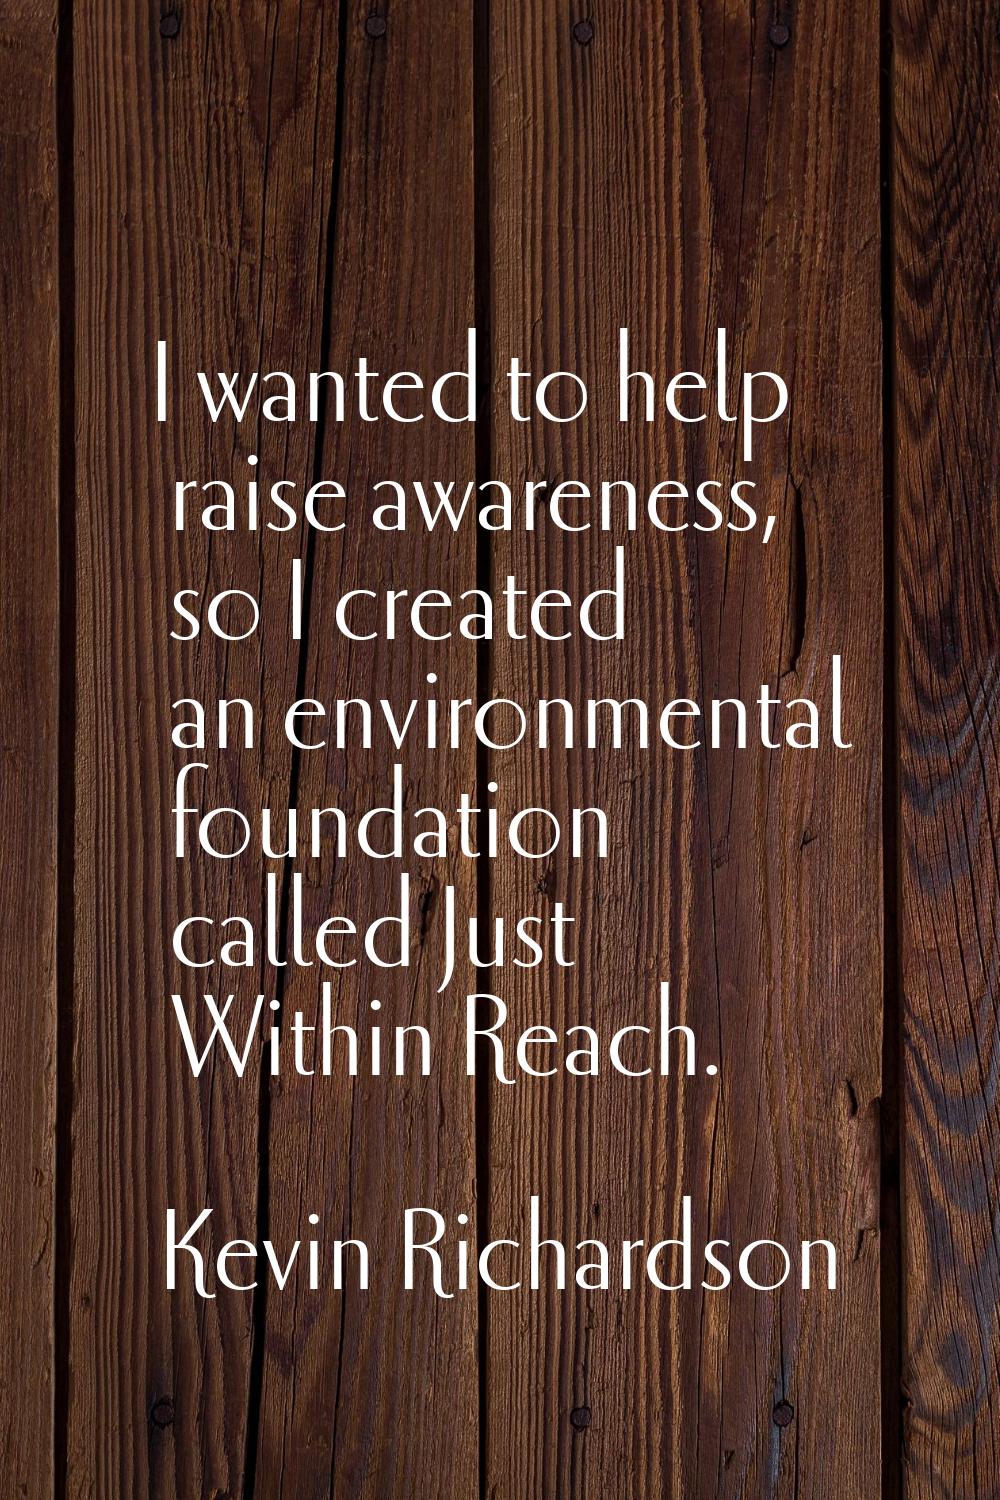 I wanted to help raise awareness, so I created an environmental foundation called Just Within Reach